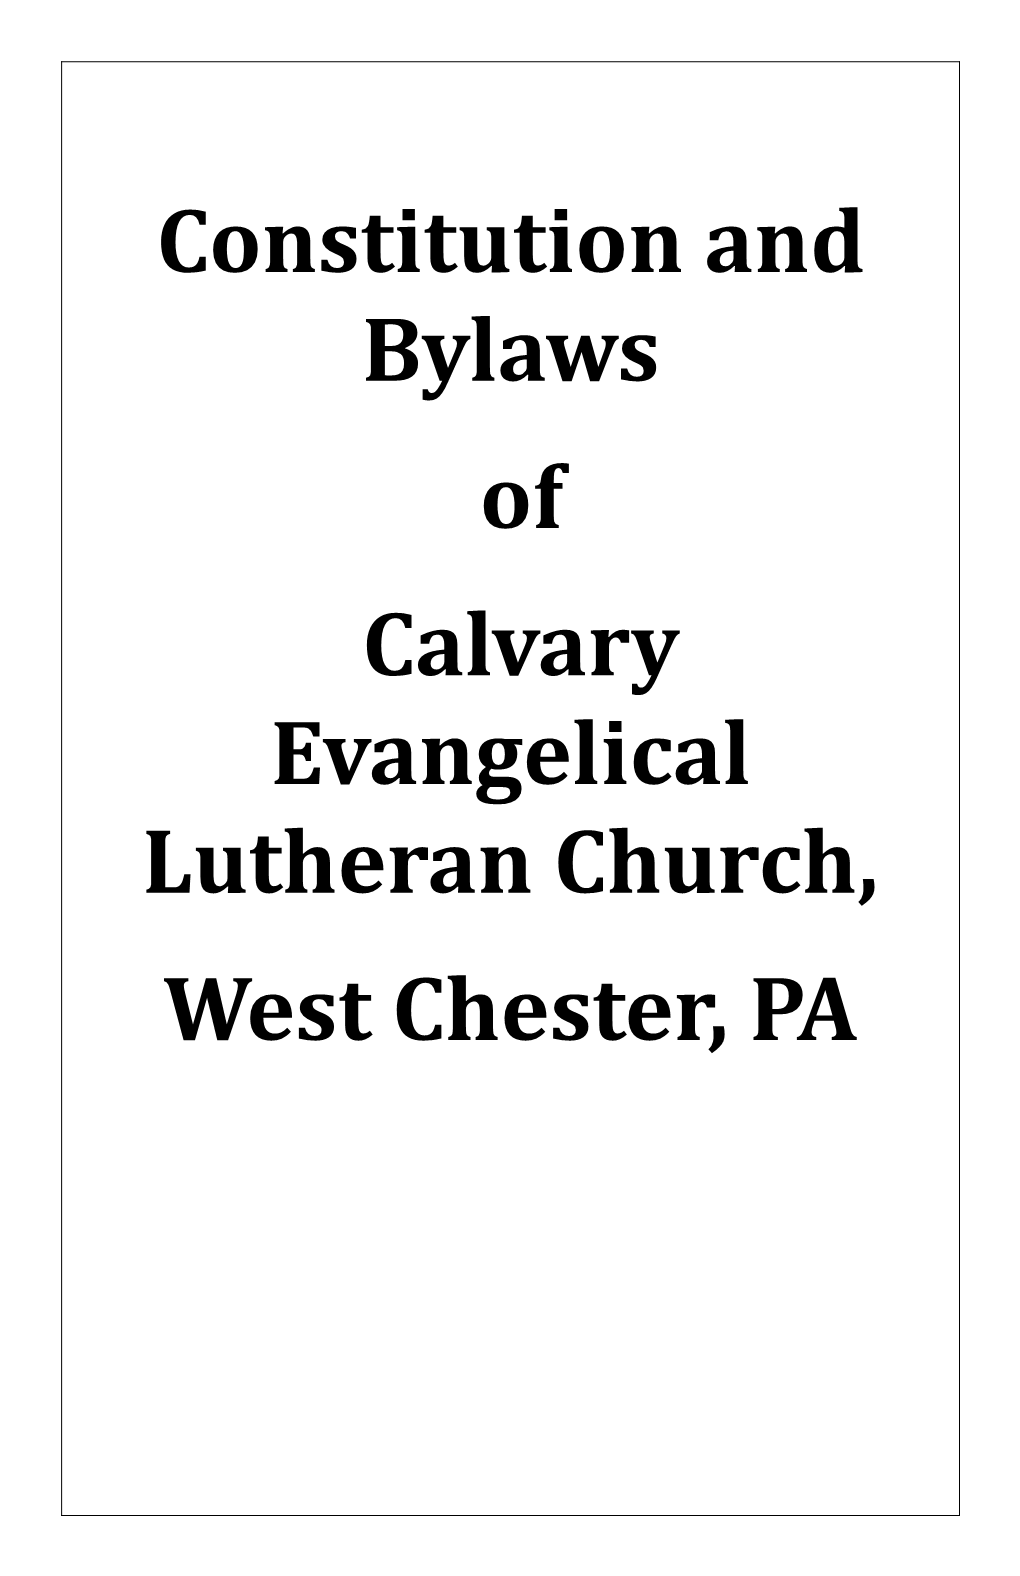 Constitution of Calvary Evangelical Lutheran Church, West Chester PA